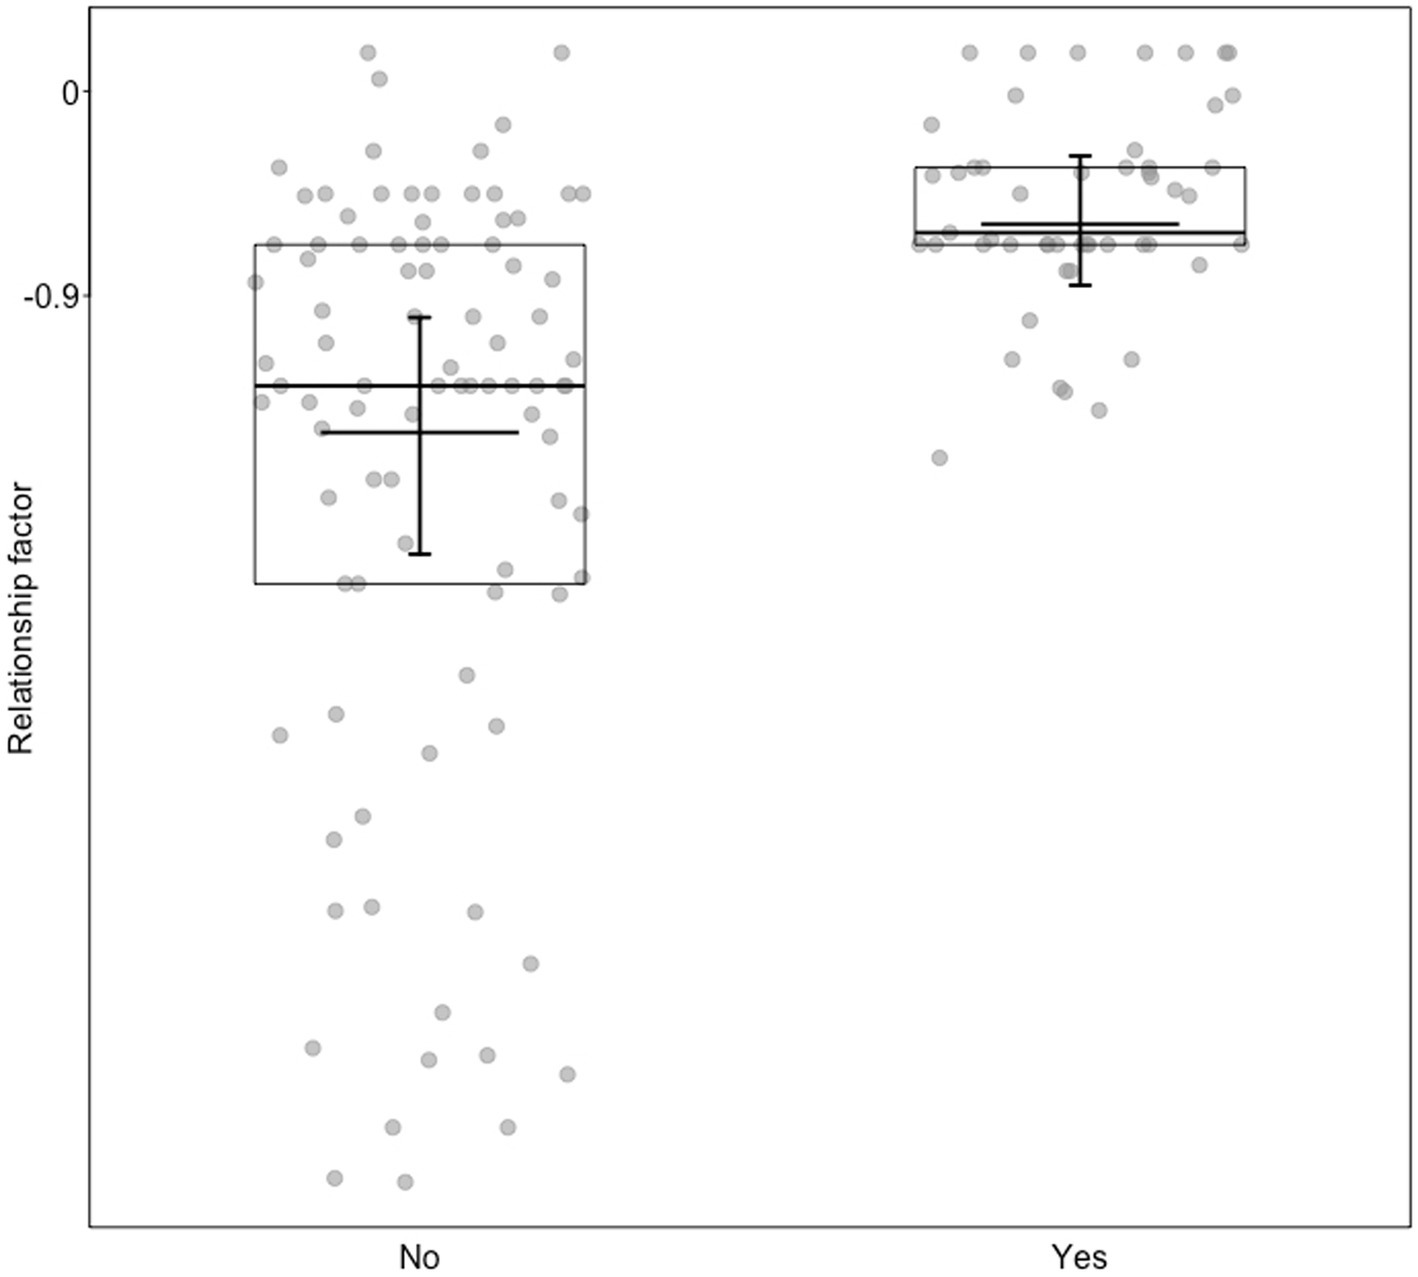 Social play scores in avoidant (n = 6) and secure (n = 32) dogs in